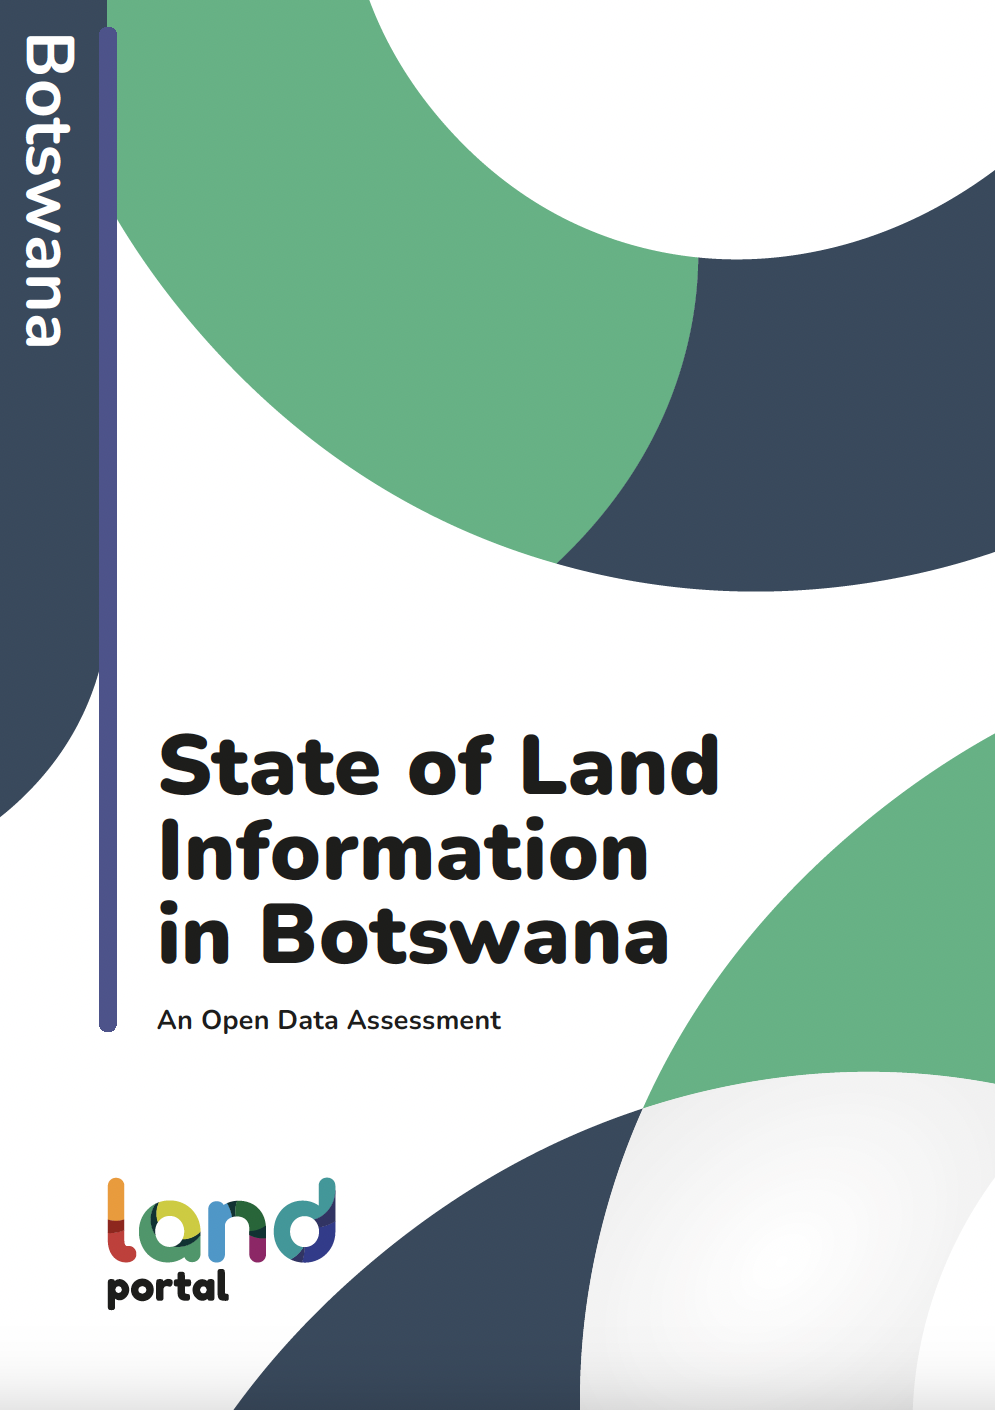 State of Land Information in Botswana